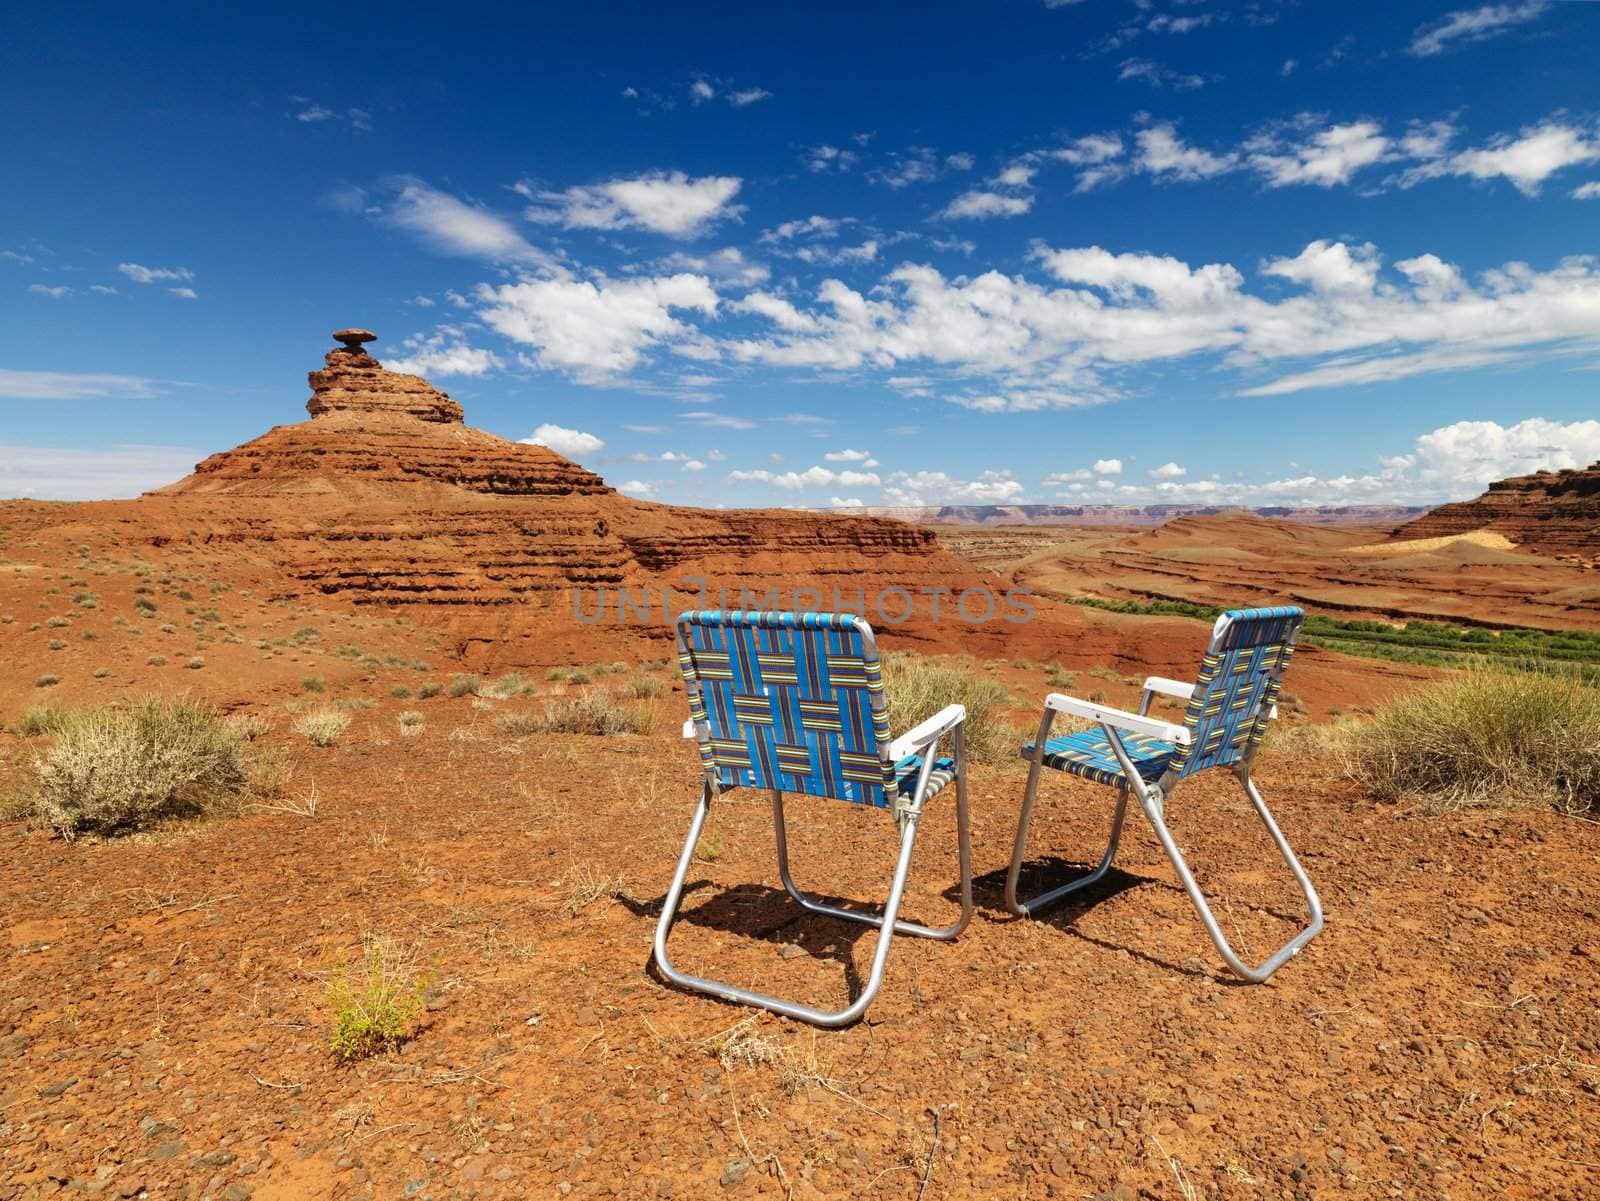 Two lawn chairs in scenic desert landscape with land formation.